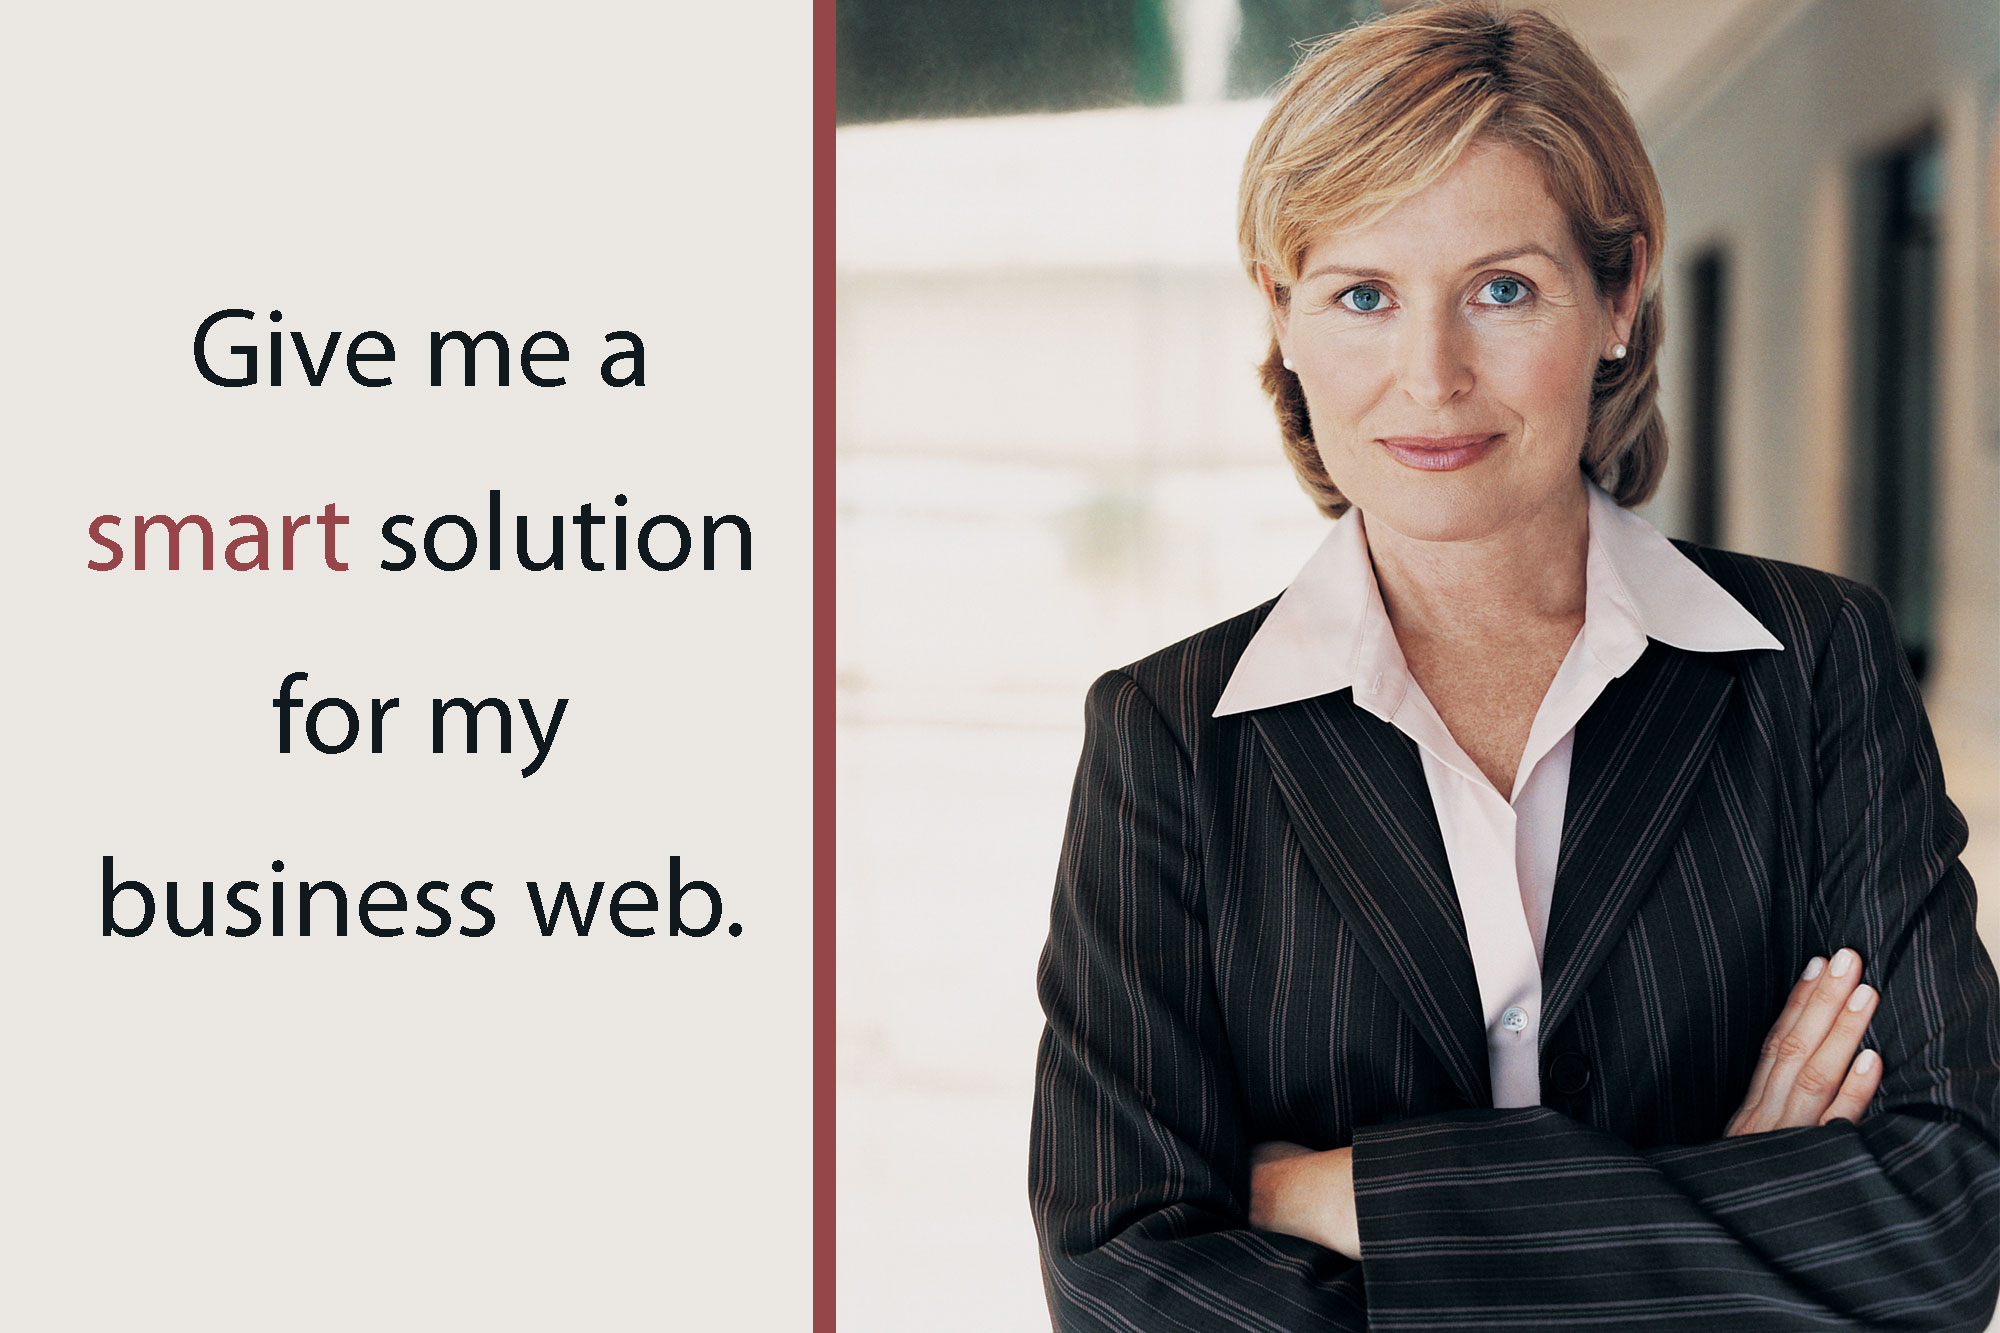 Give me a Smart solution for my business web.